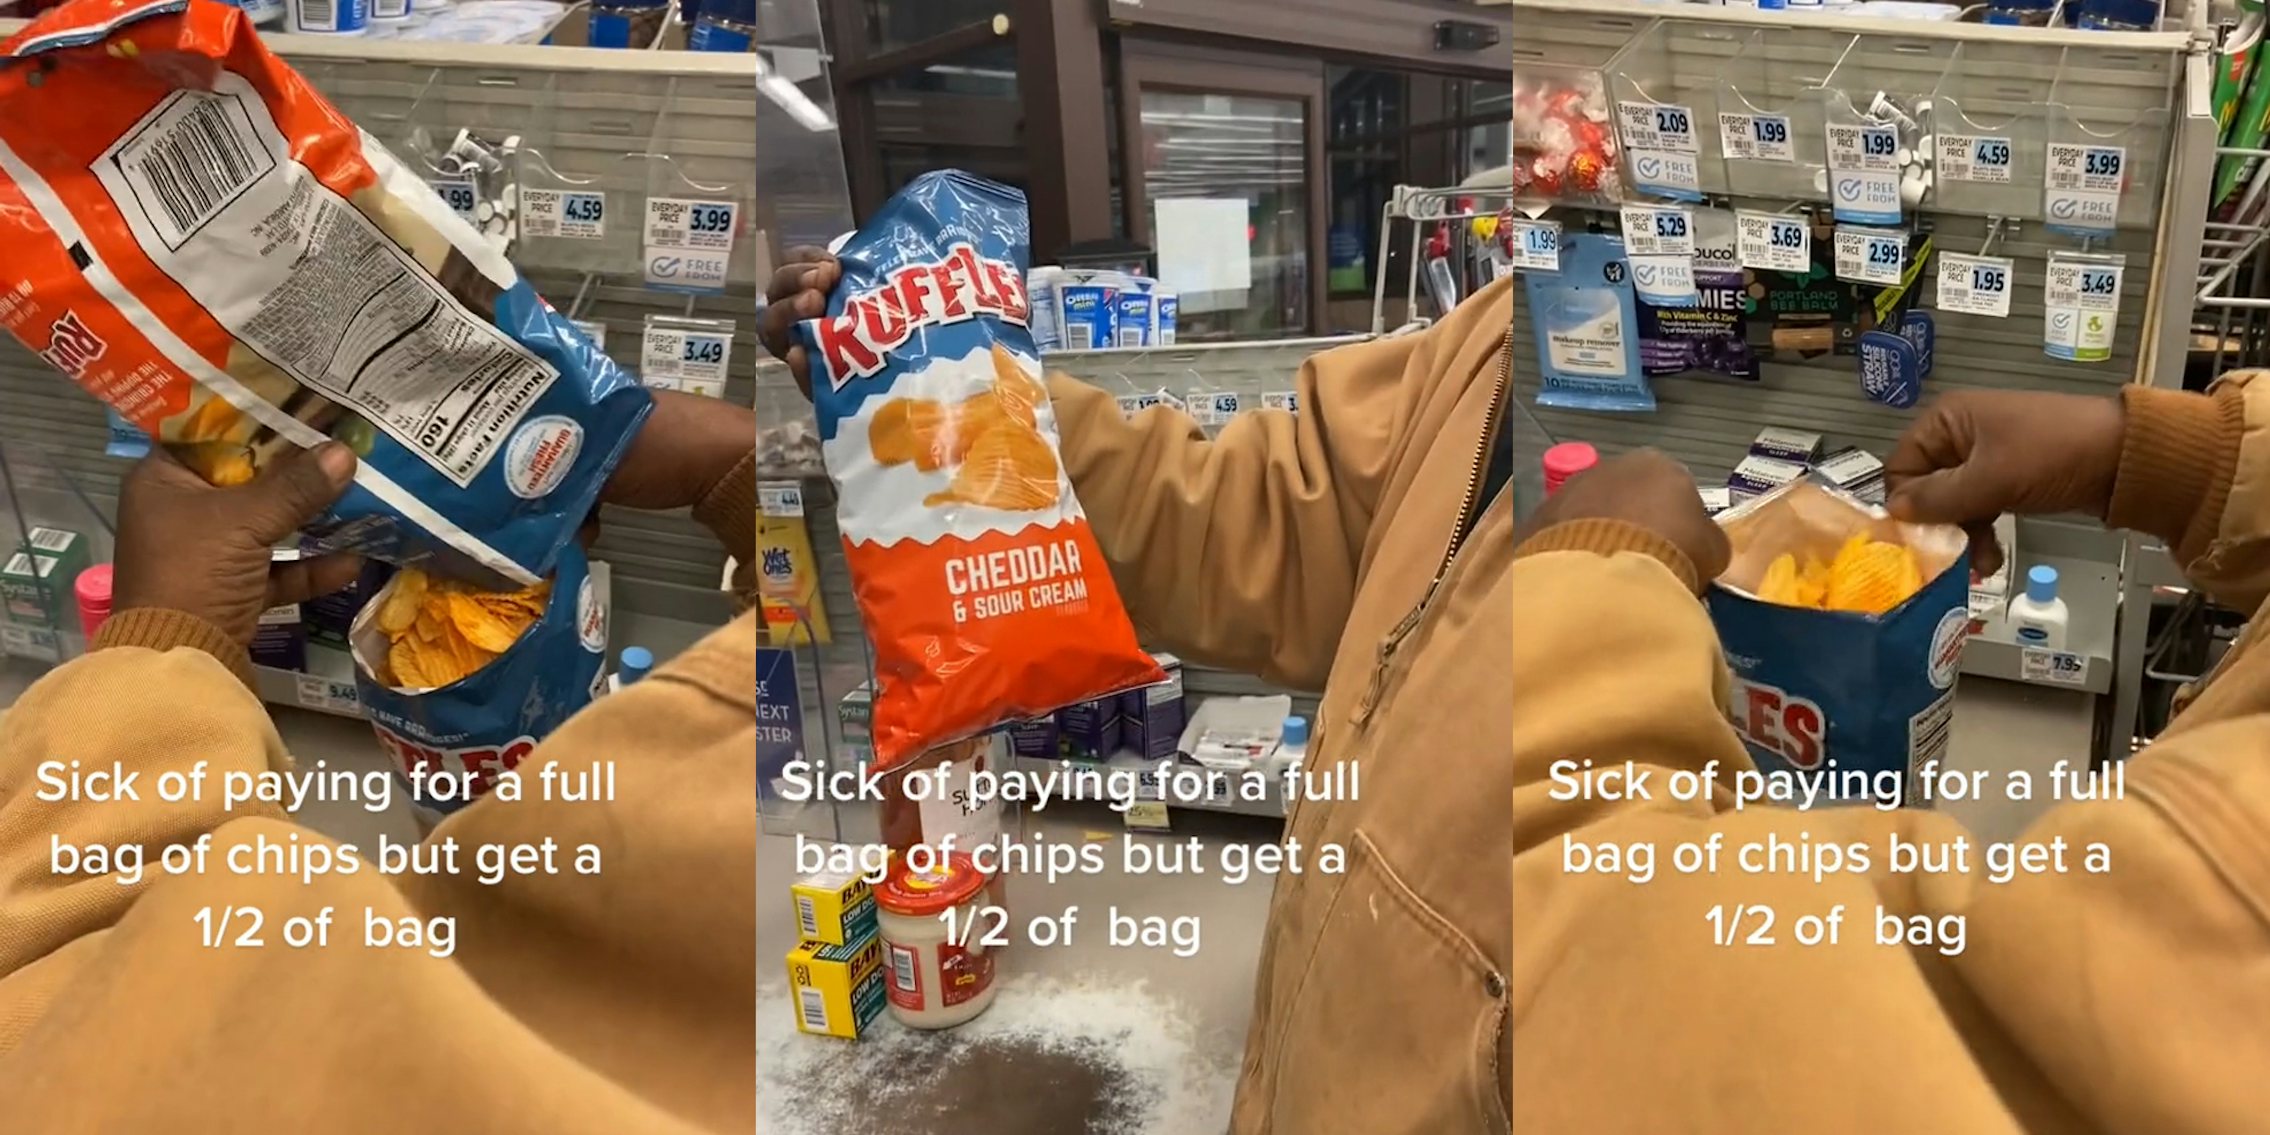 shopper pouring bag of Ruffles chips into another to make one full bag of chips caption 'Sick of paying for a full bag of chips but get a 1/2 of bag' (l) shopper holding up self filled bag of chips caption 'Sick of paying for a full bag of chips but get a 1/2 of bag' (c) man closing bag of chips at counter caption 'Sick of paying for a full bag of chips but get a 1/2 of bag' (r)